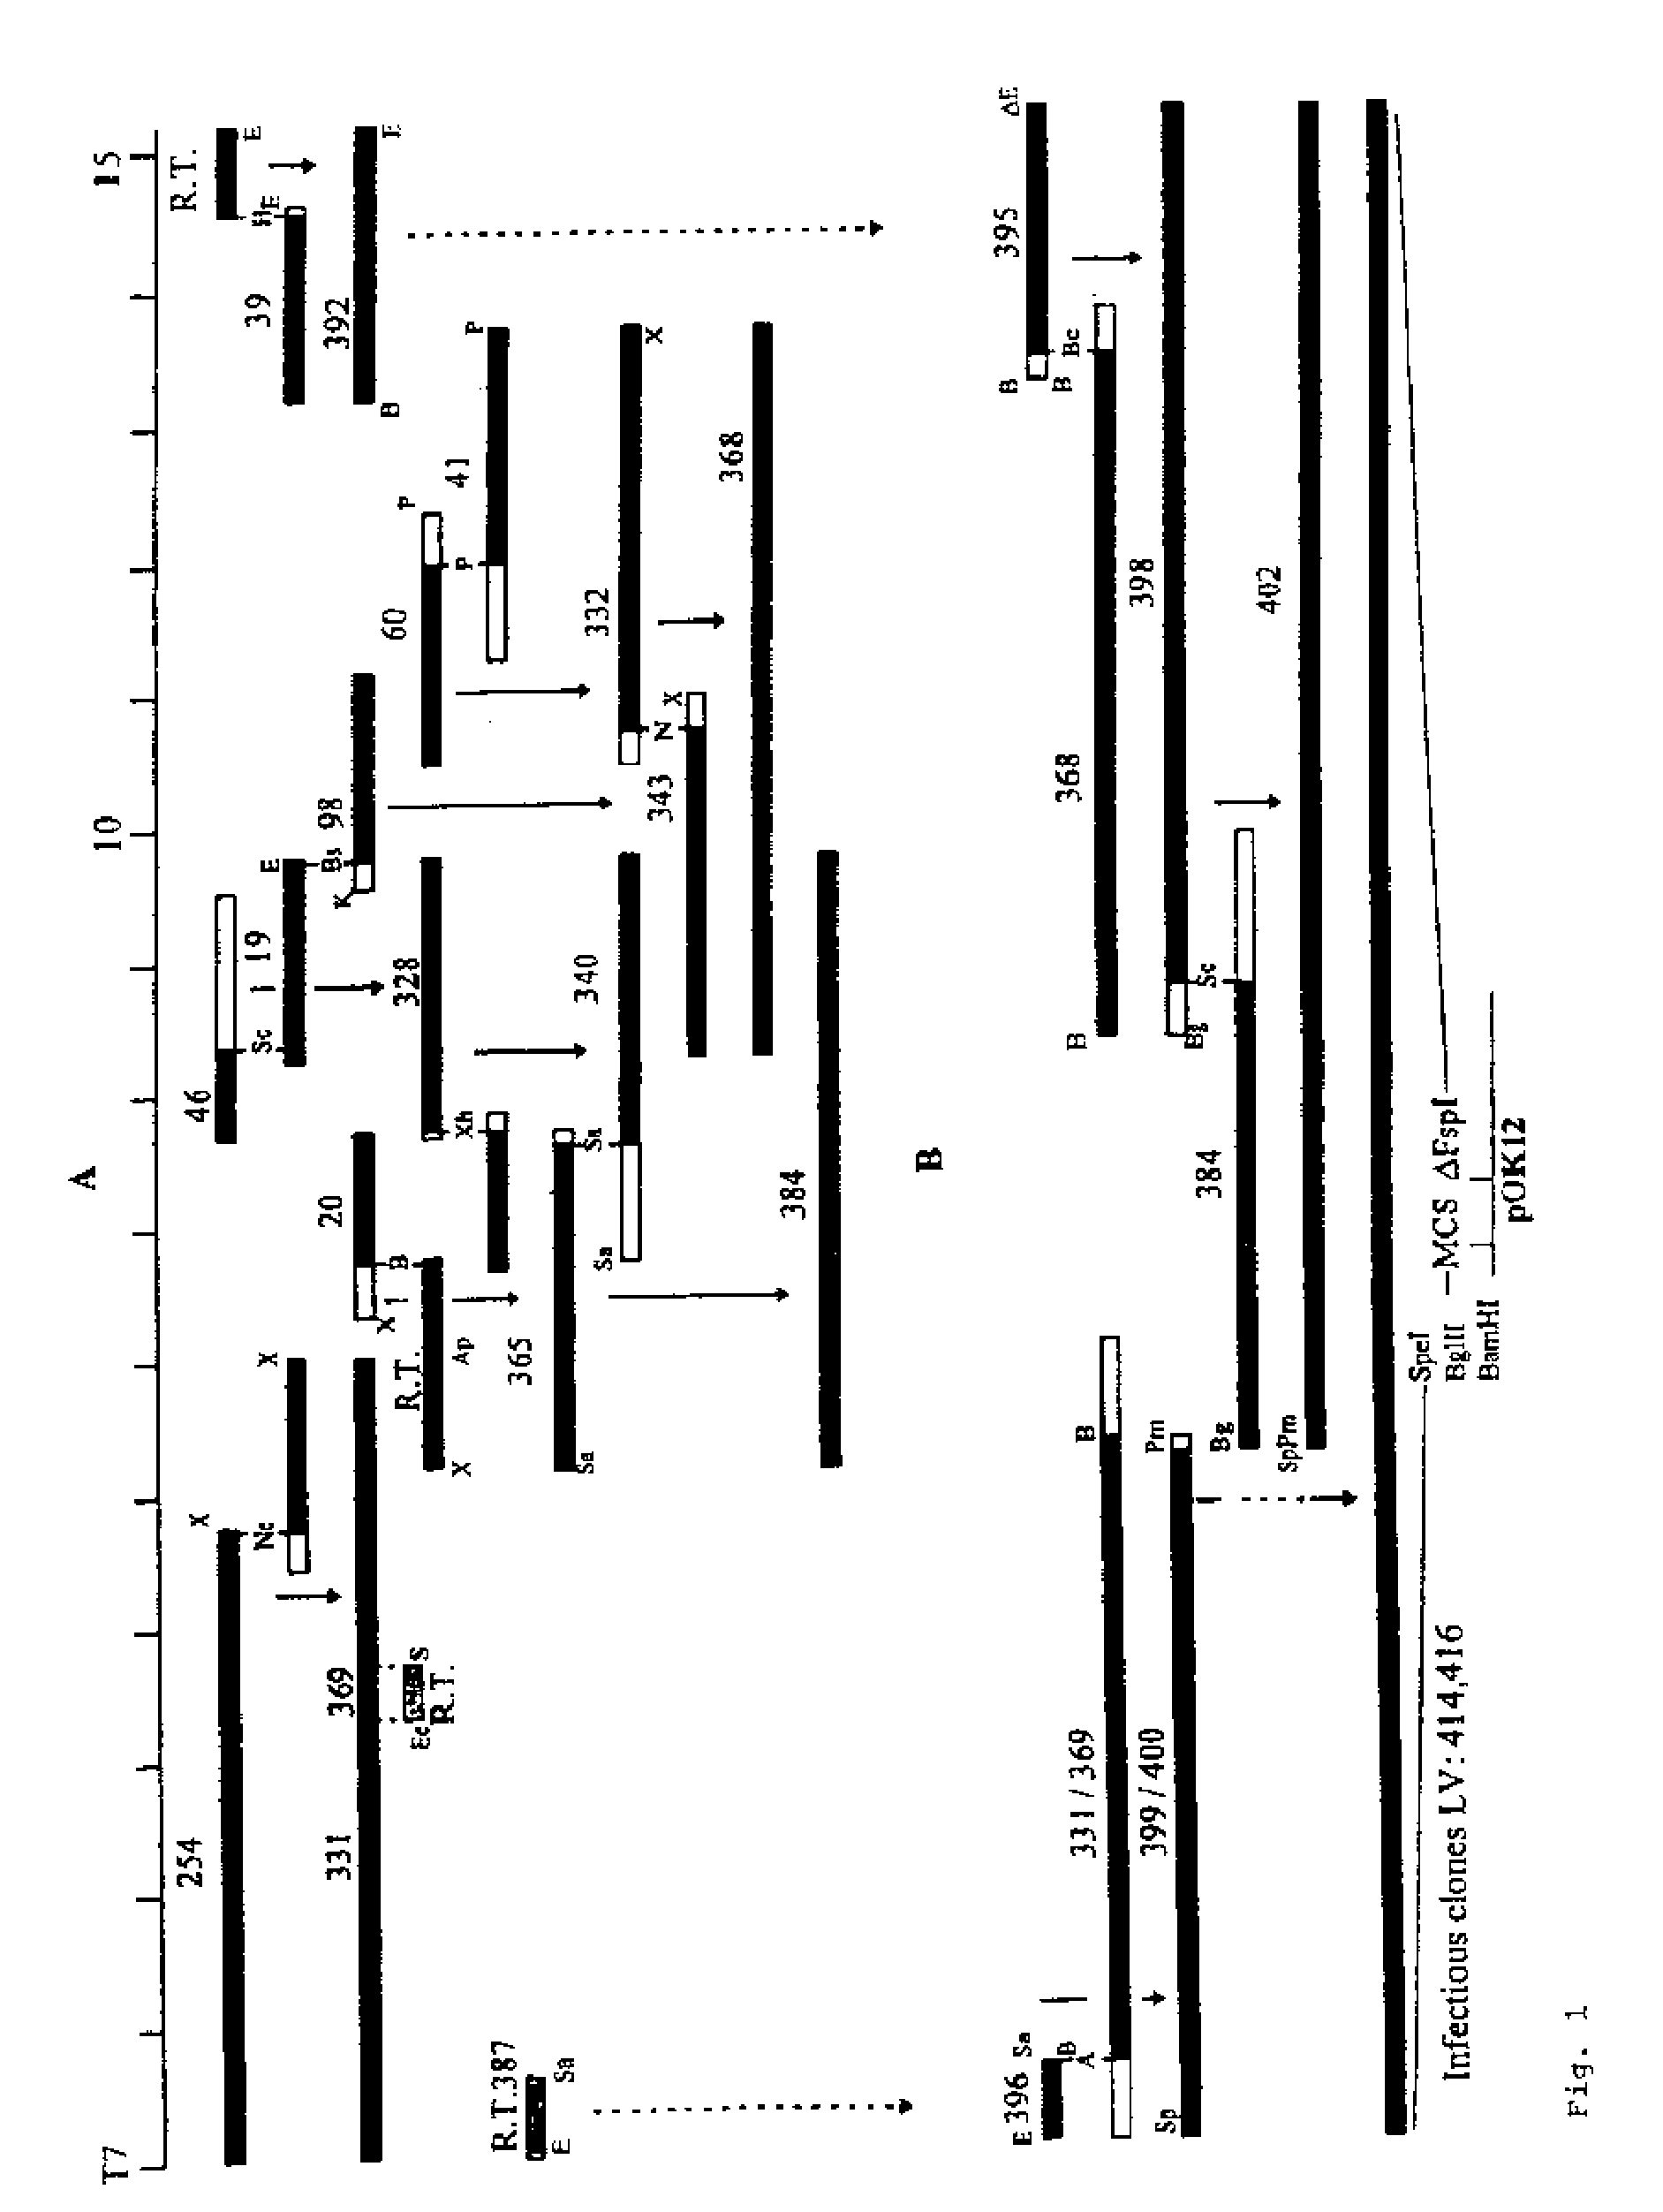 Infectious clones of RNA viruses and vaccines and diagnostic assays derived thereof